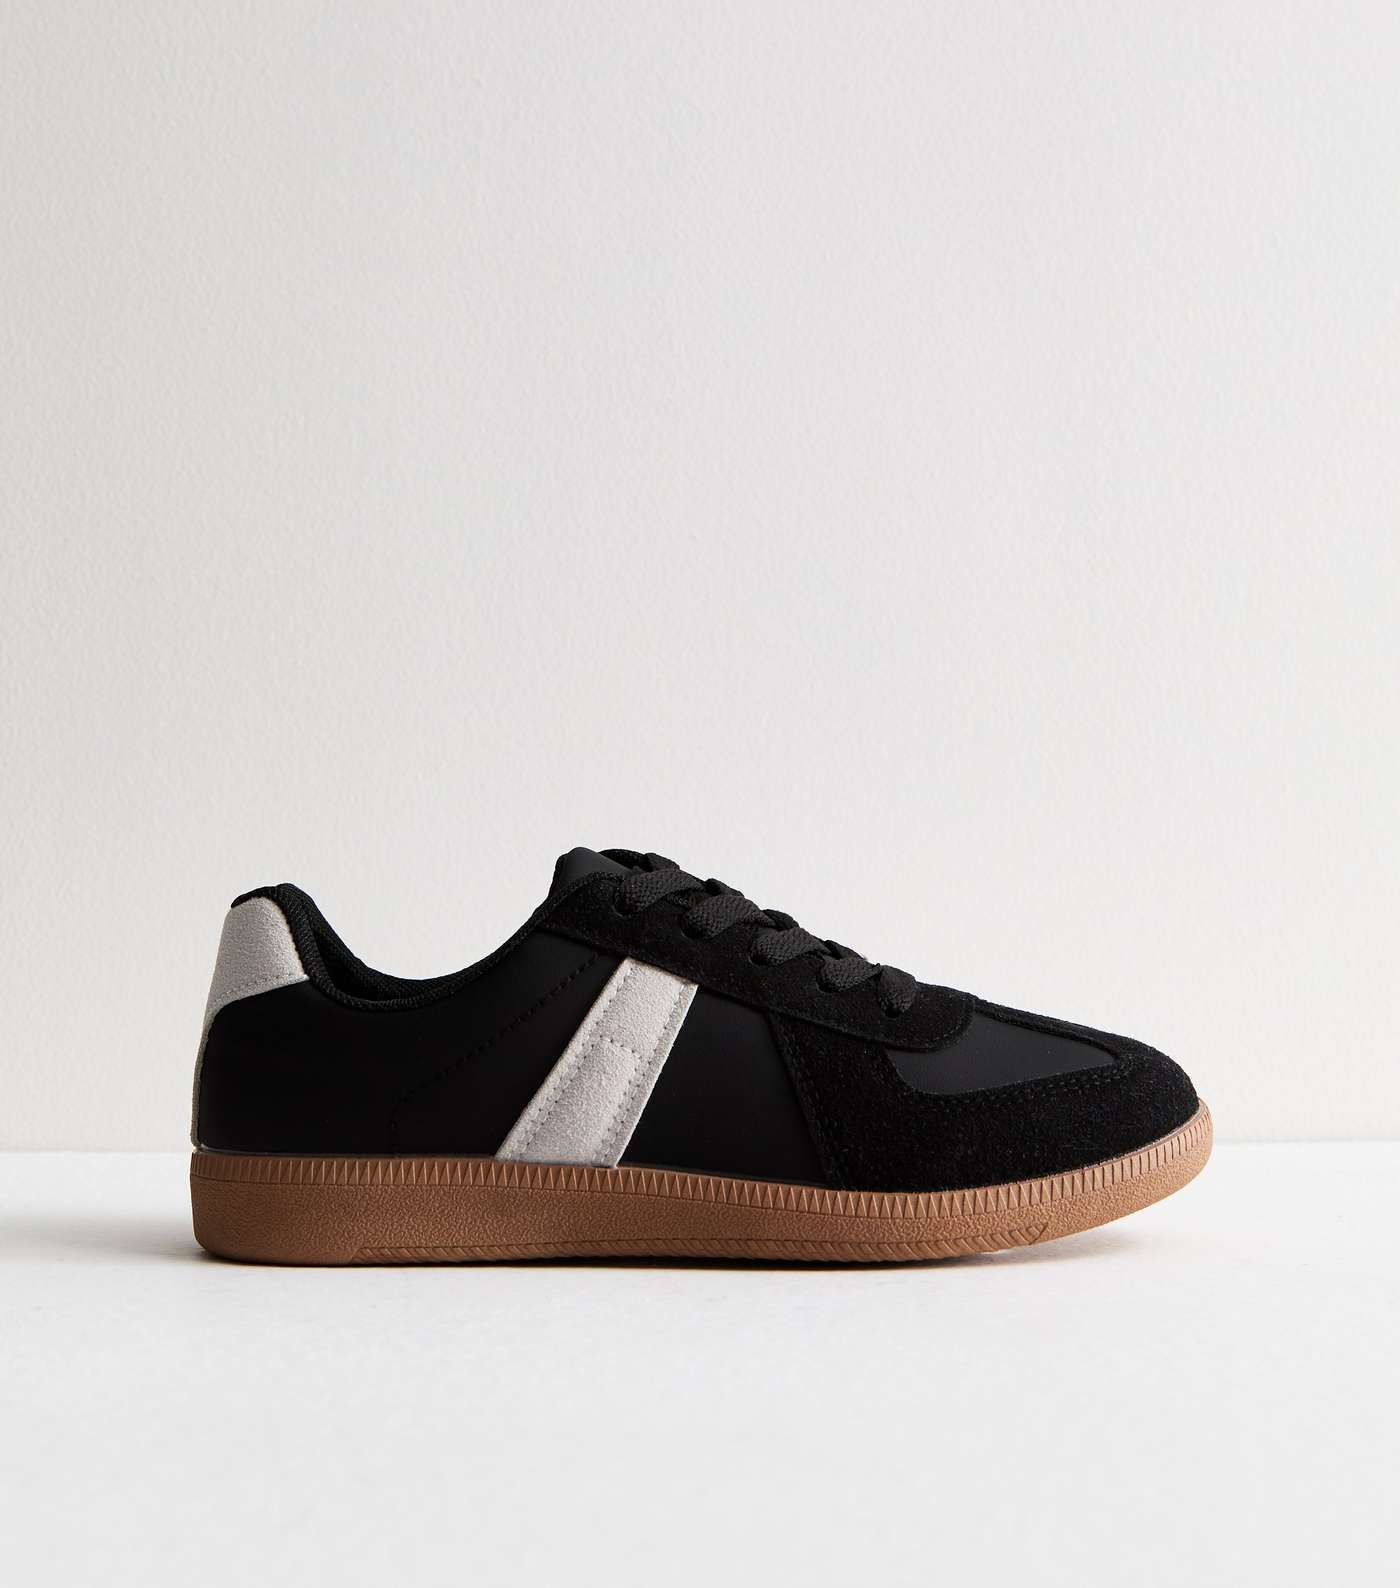 Truffle Black Leather-Look Gum Sole Trainers Image 3